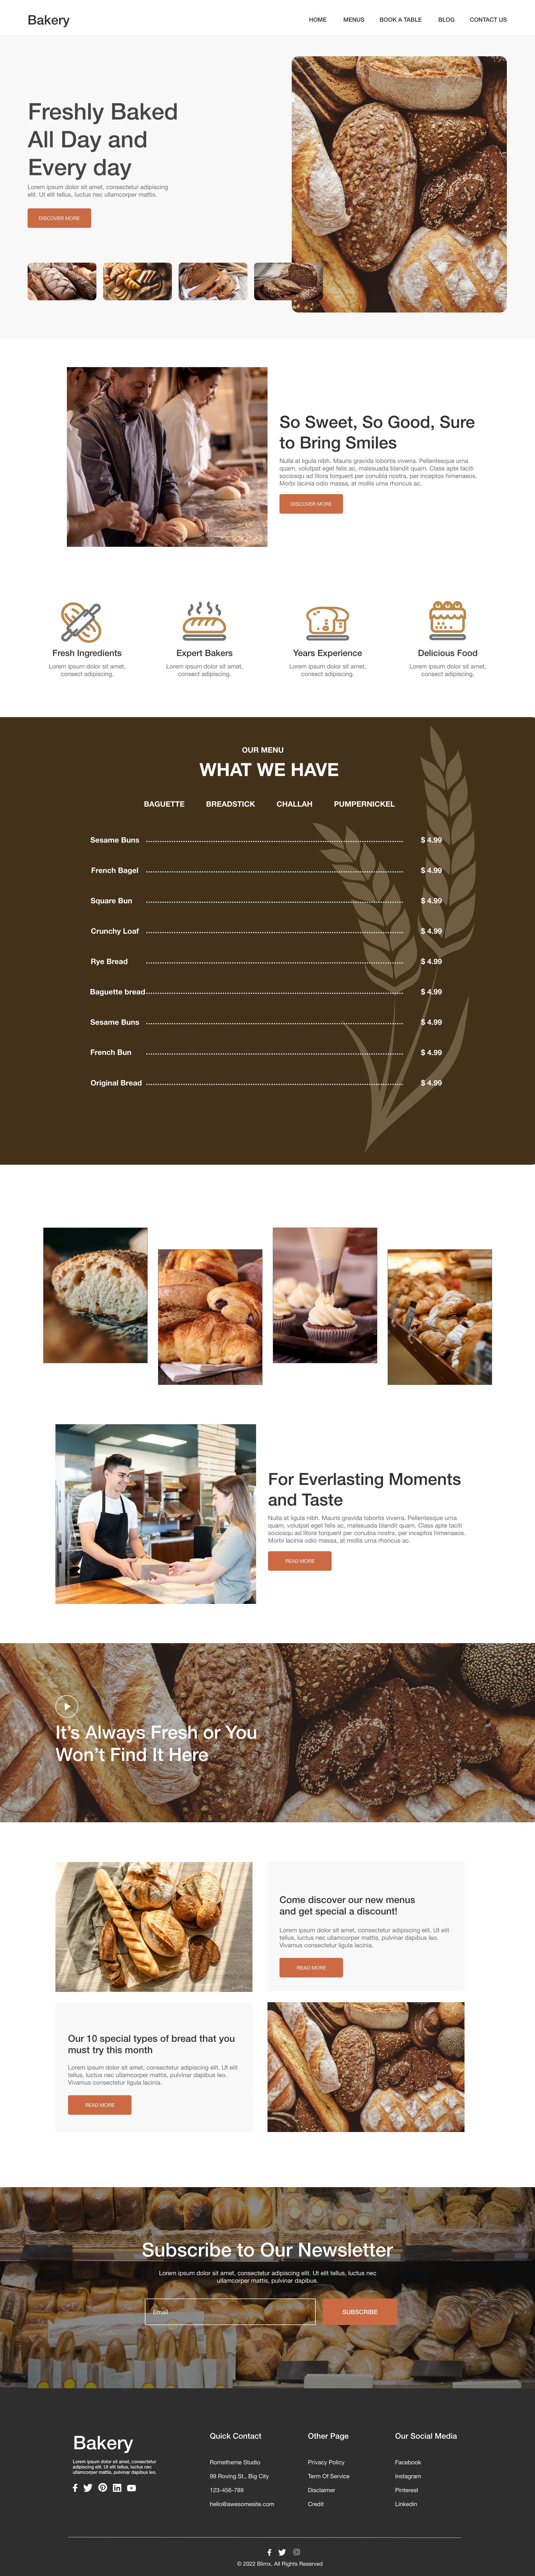 Bakery and Pastry Website Design